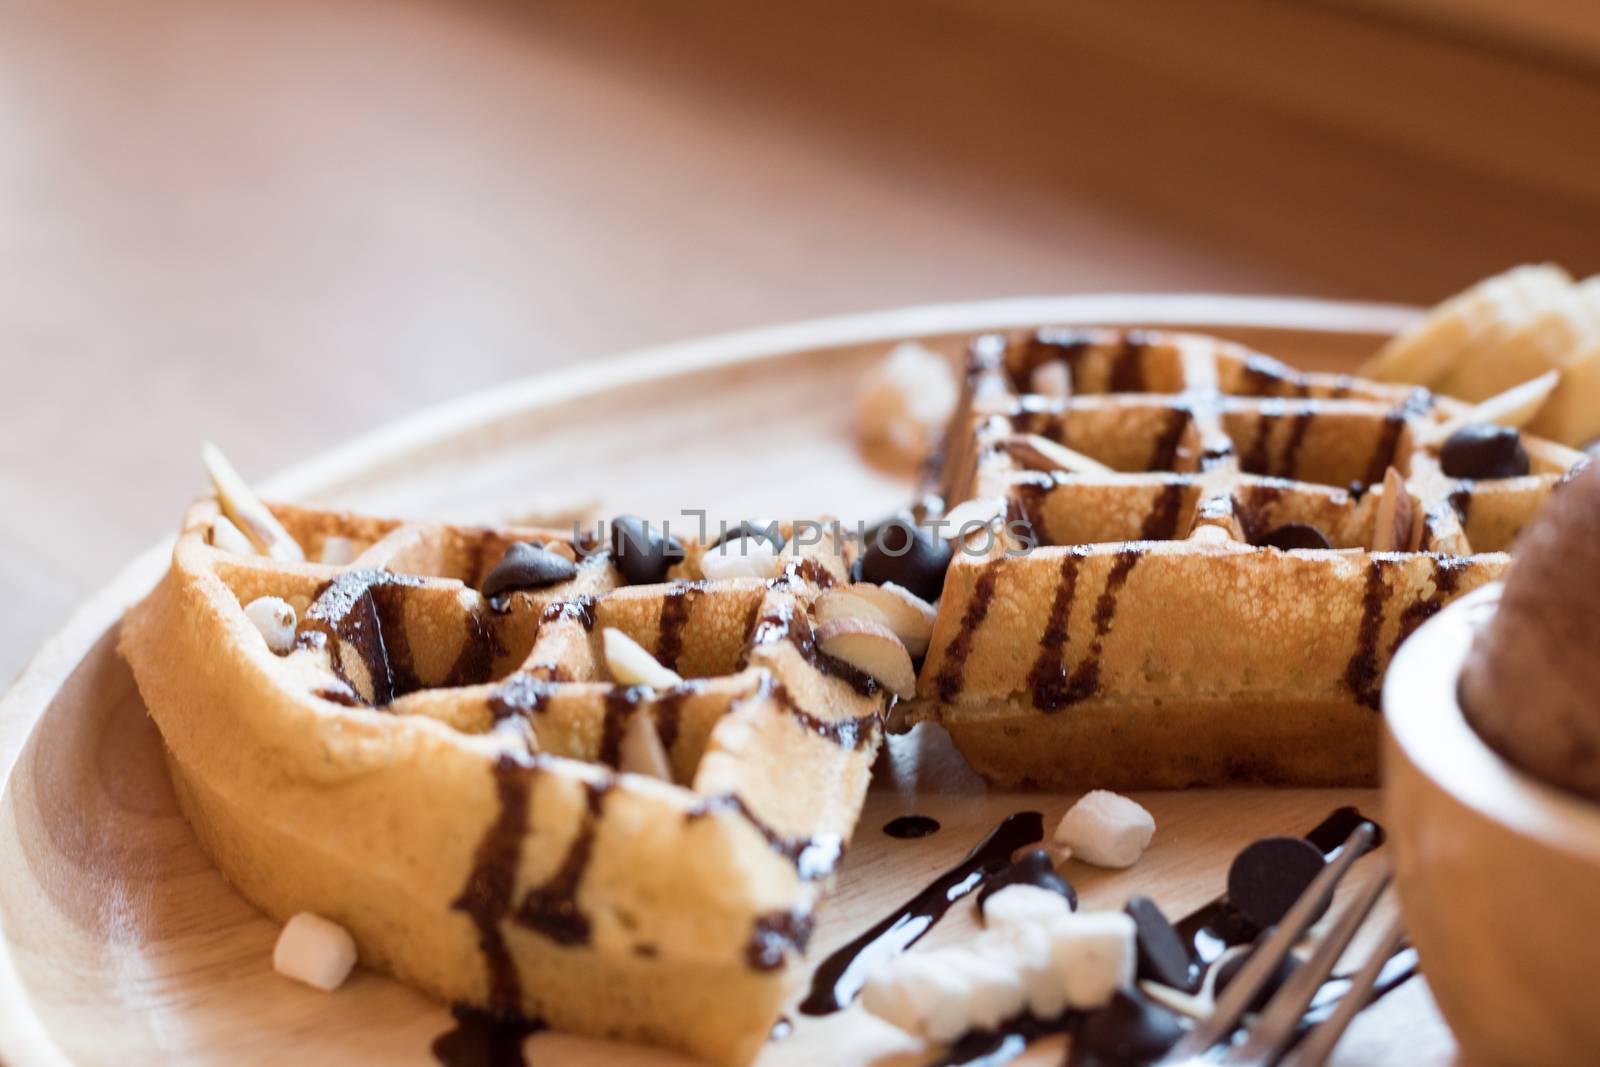 Belgian waffles with fruit and chocolate, forest fruit, all home by dfrsce